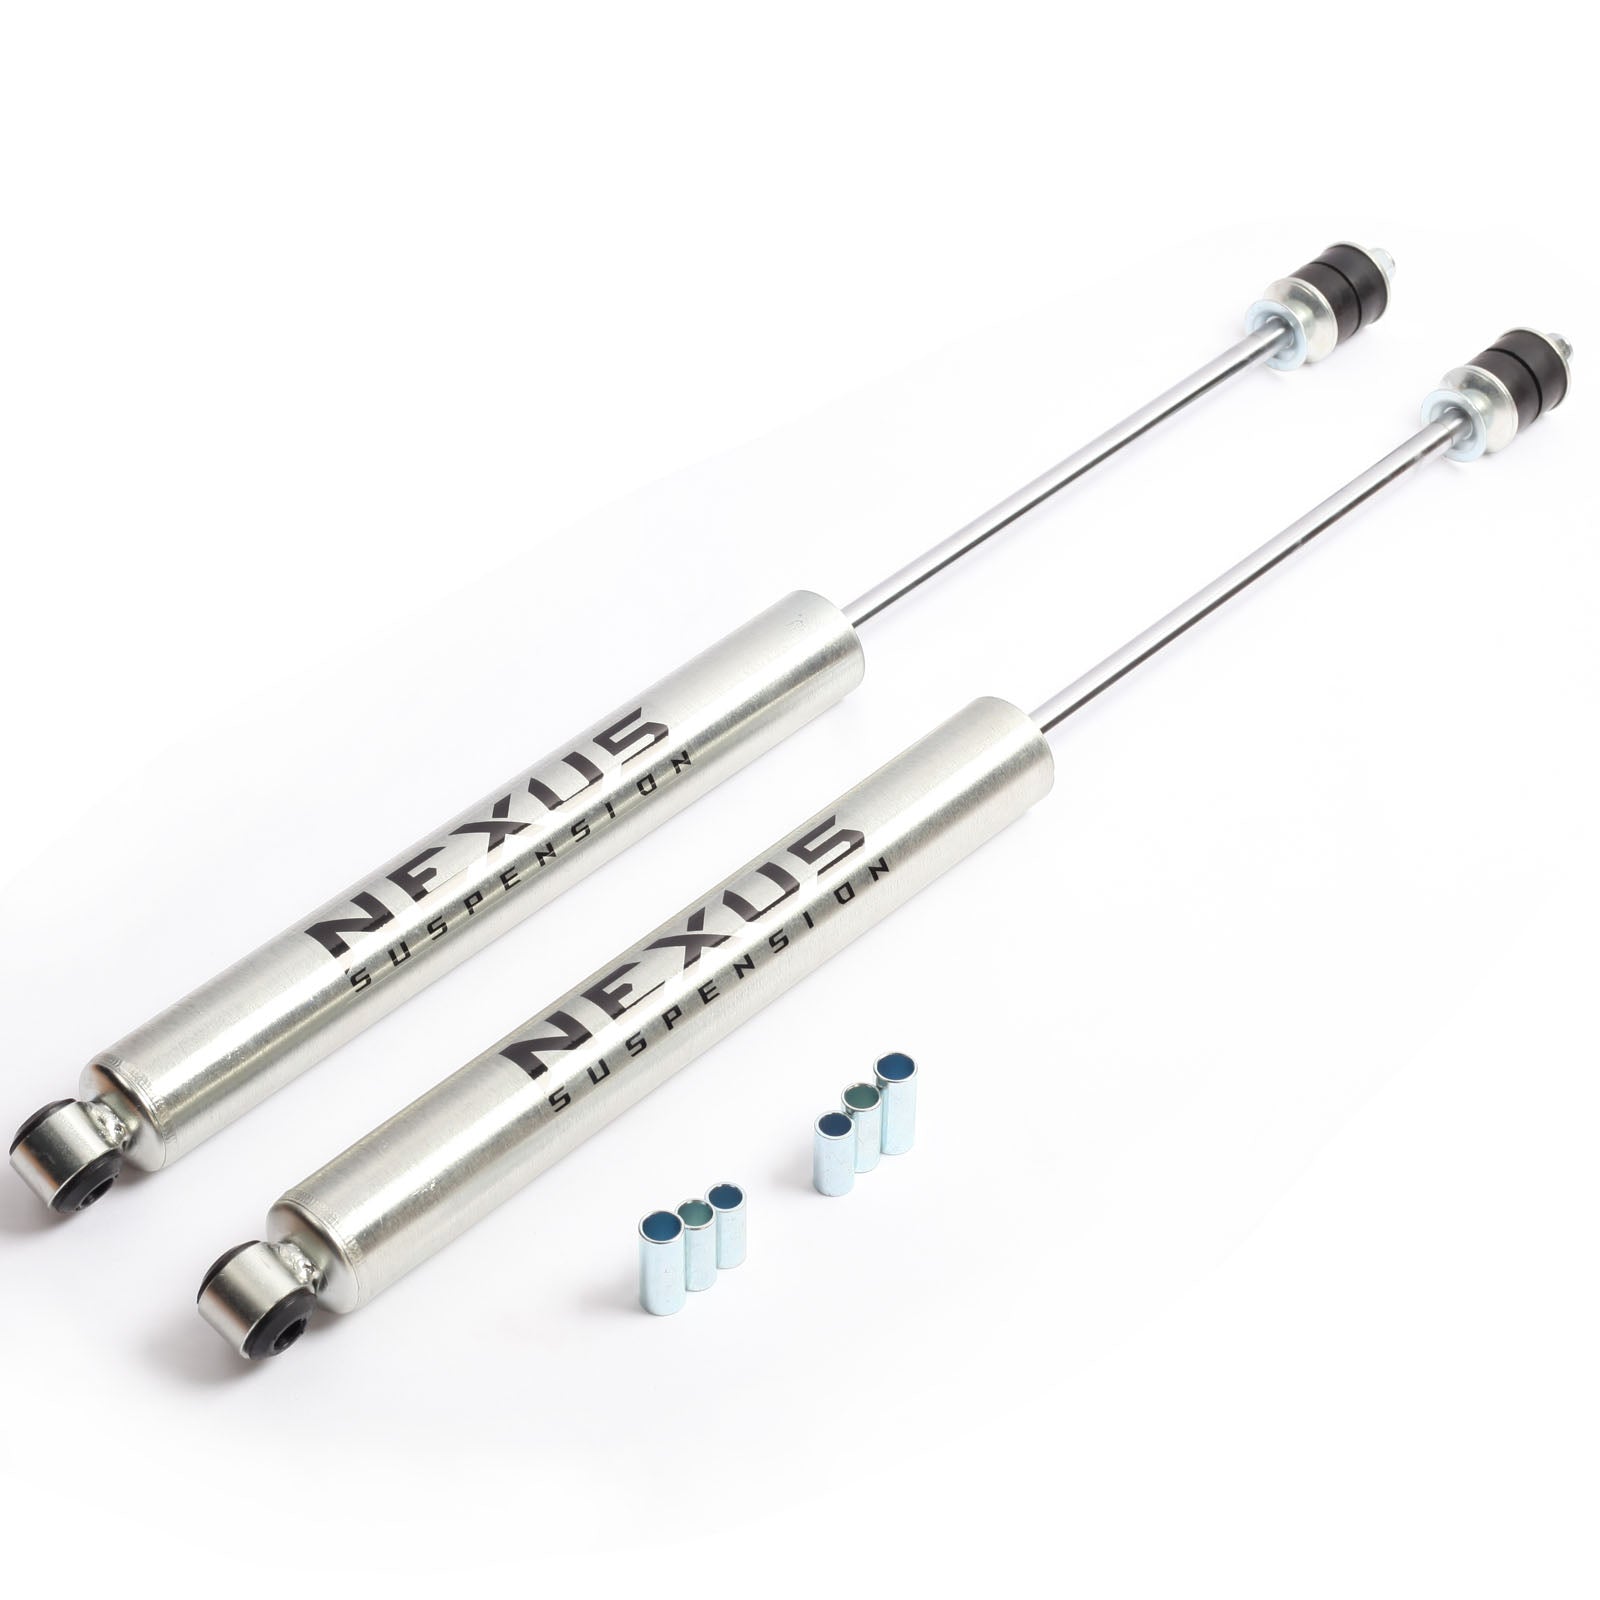 NEXUS SUSPENSION 4.5 Inch Lift Front Shock Absorber for Dodge Ram 1500 1994-2001,Zinc Plated Coating,Pair Pack